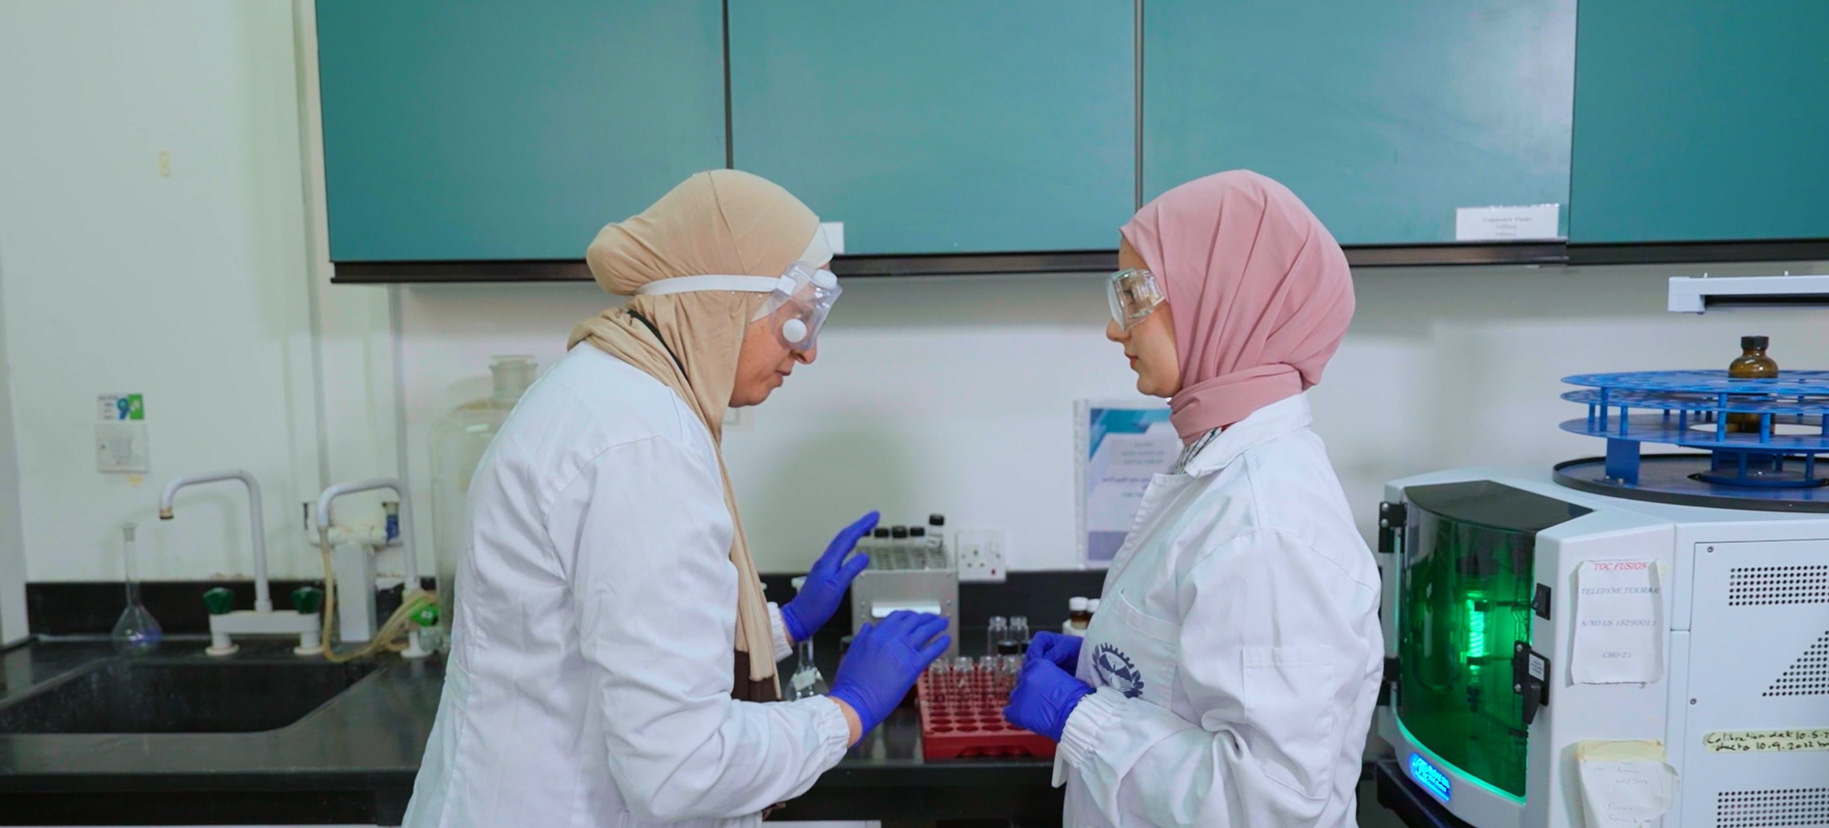 Two women in protective wear work in a lab